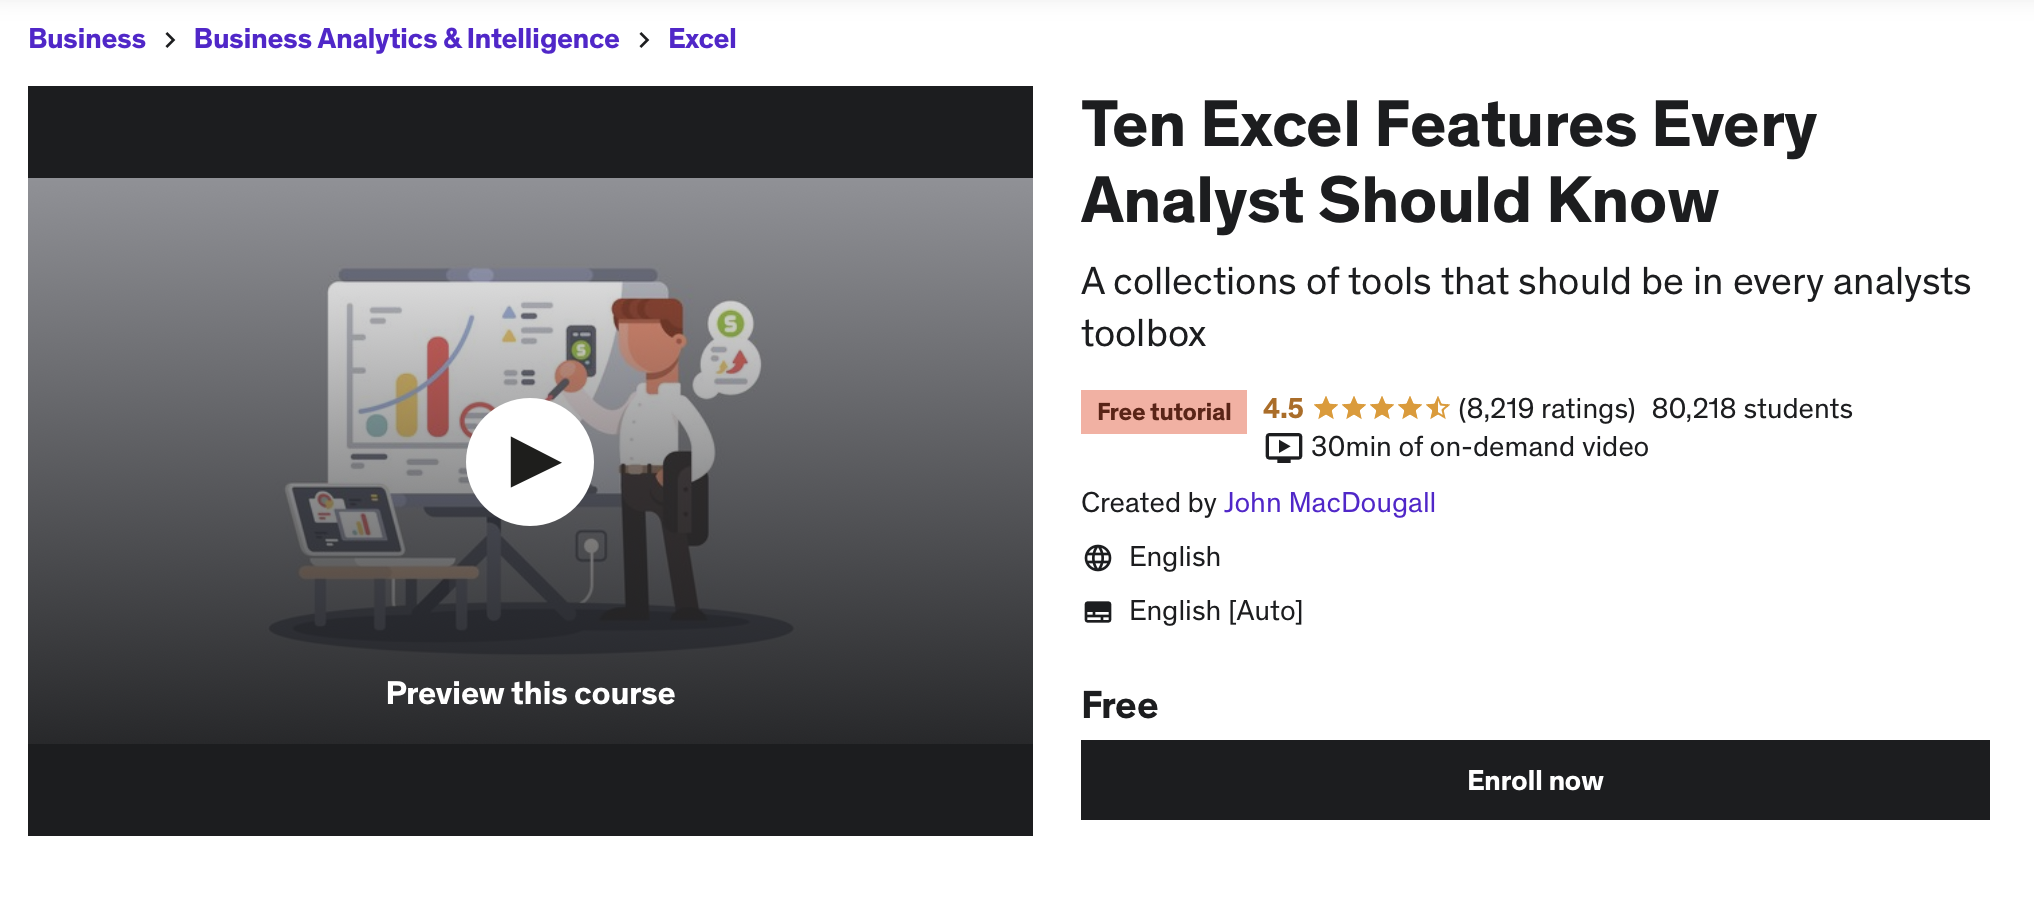 Ten Excel Features Every Analyst Should Know